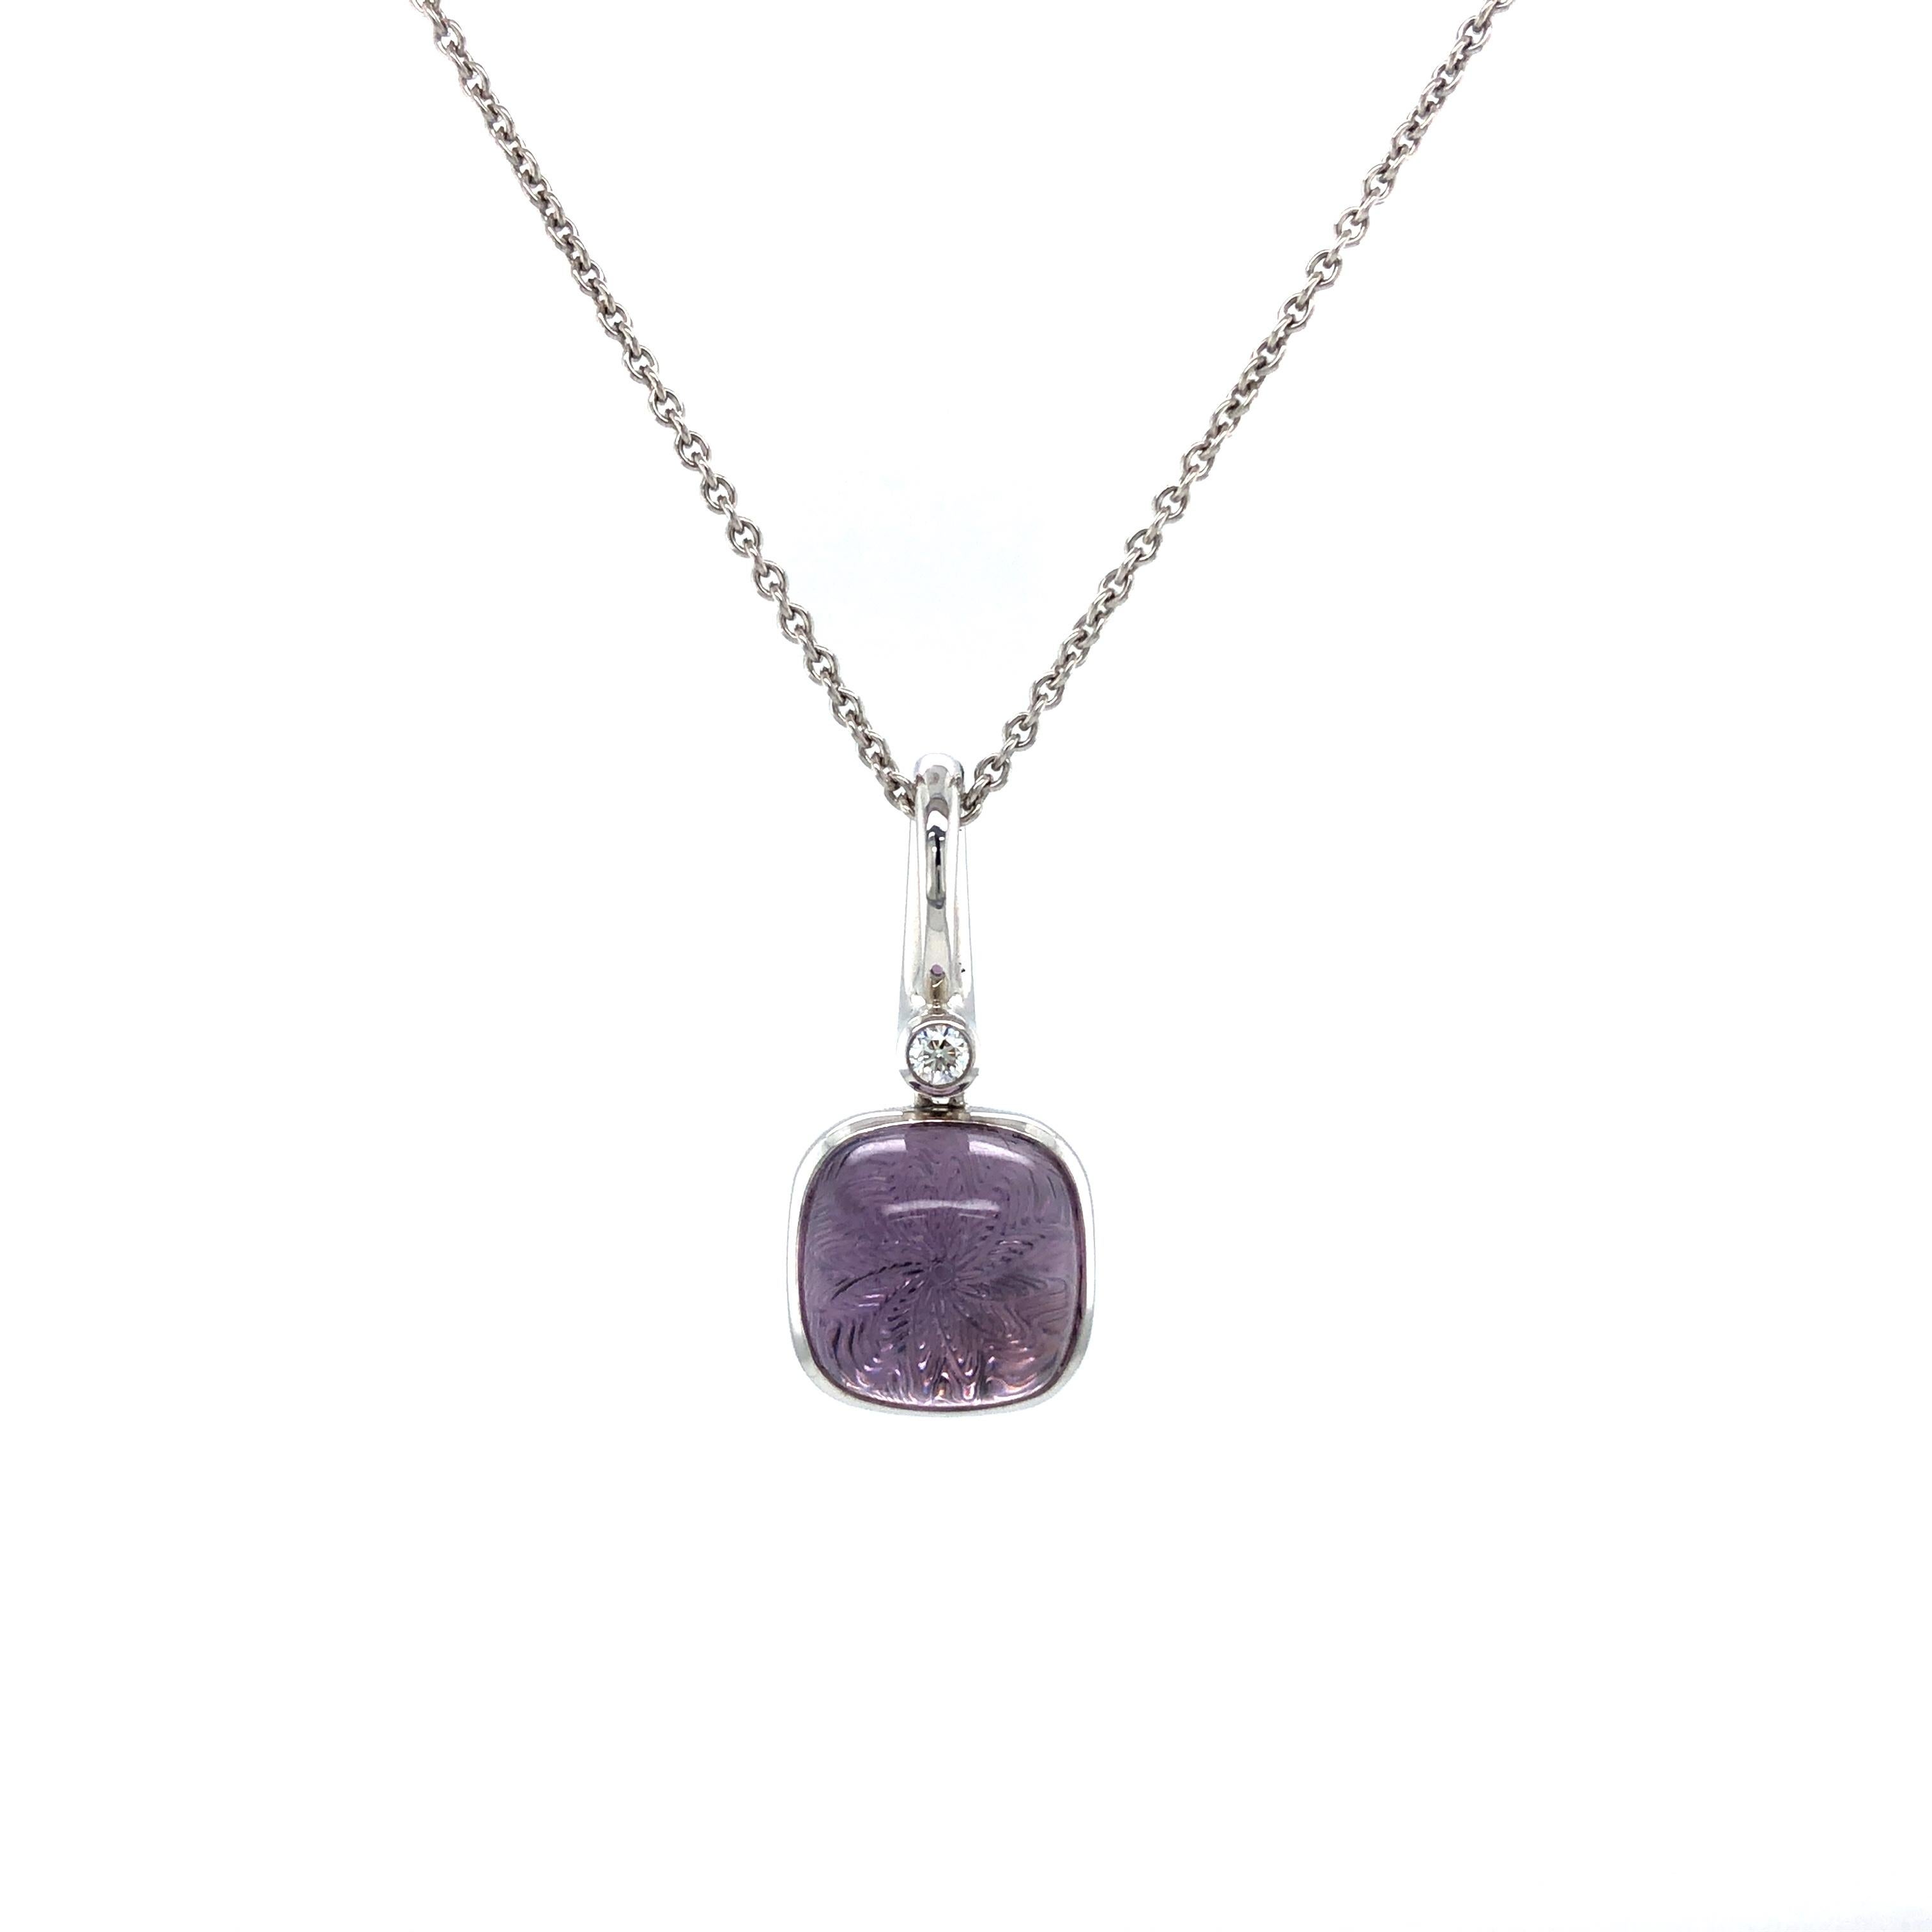 Victor Mayer square shaped pendant 18k white gold, Era Collection, 1 diamond 0.04 ct, G VS, 1 amethyst cabochon, 18k guilloche disc

About the creator Victor Mayer
Victor Mayer is internationally renowned for elegant timeless designs and unrivalled